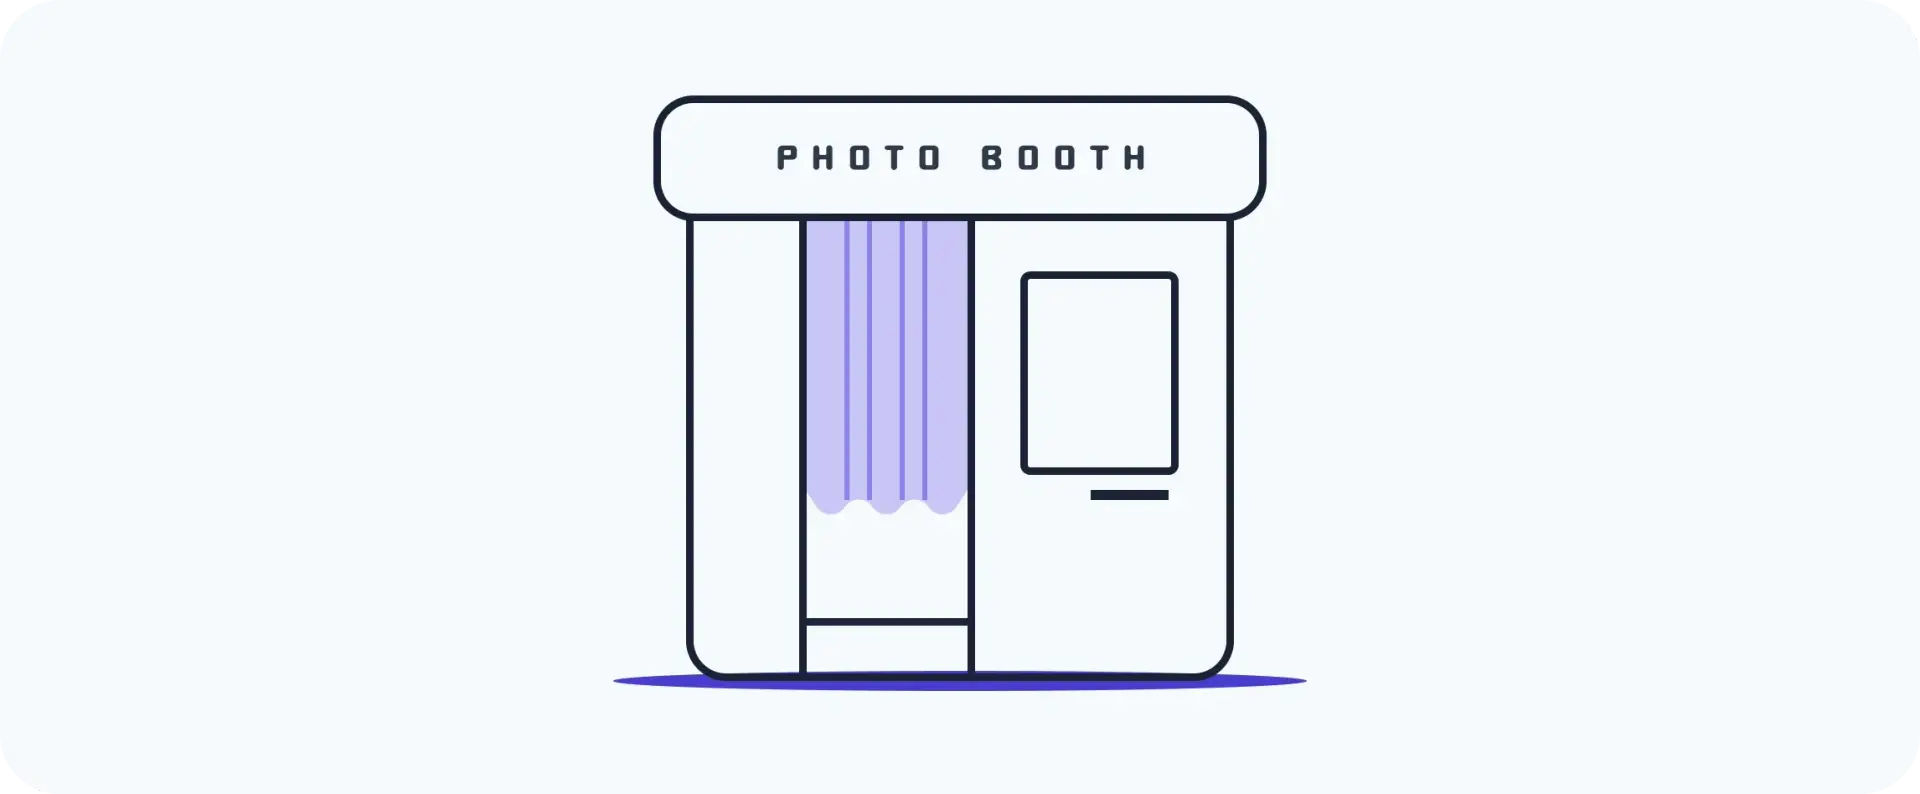 An illustration of a traditional photo booth you might find at Tesco.